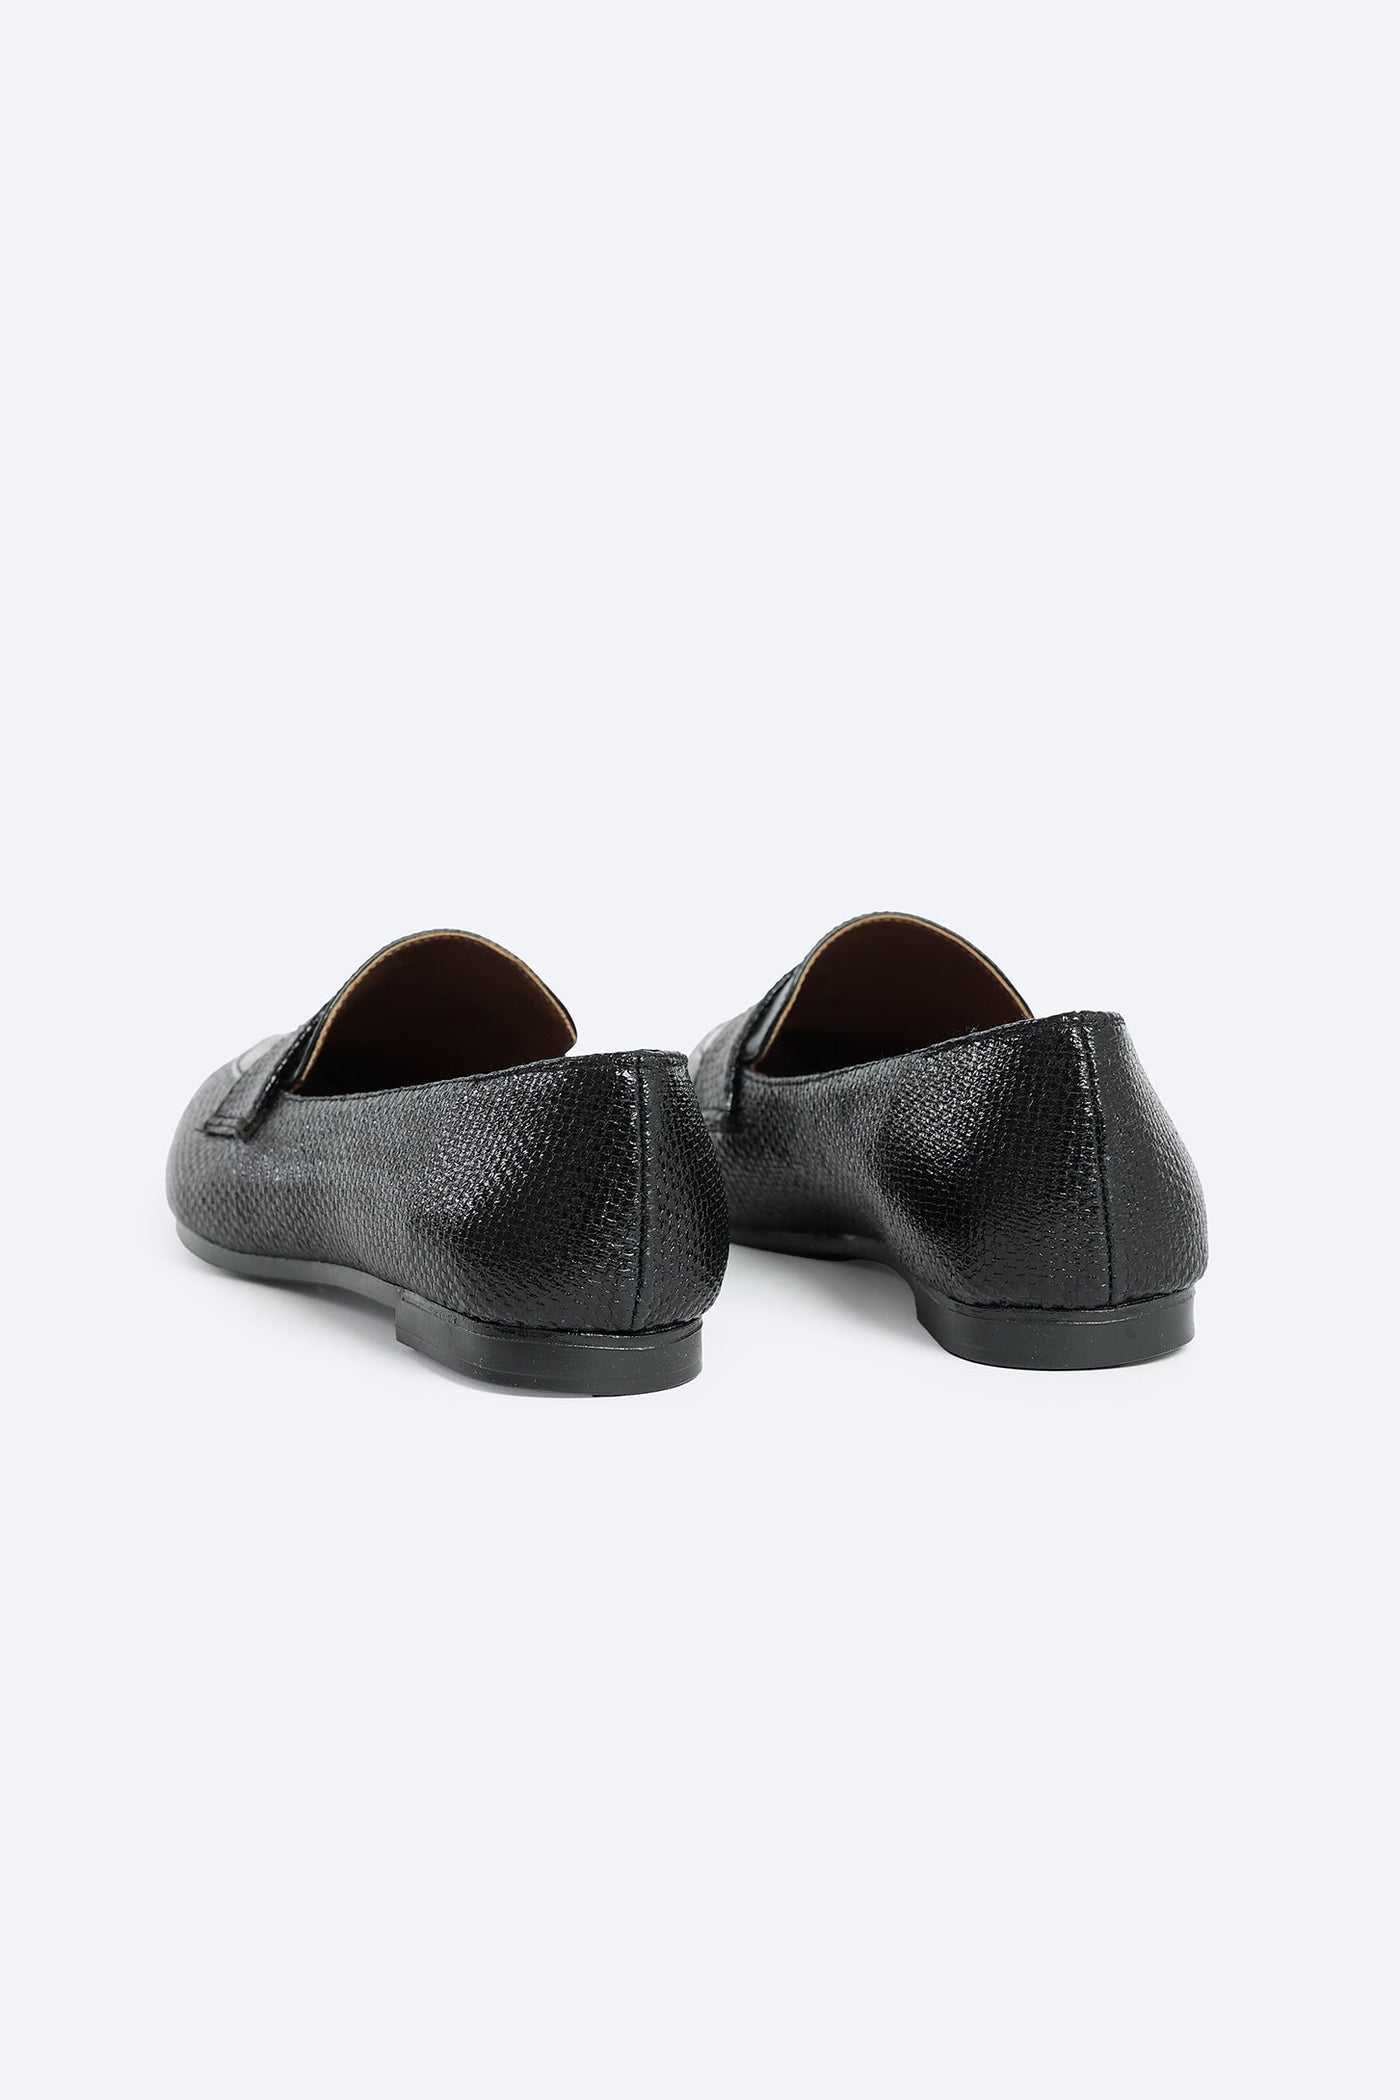 Luxe Look Loafers - Black